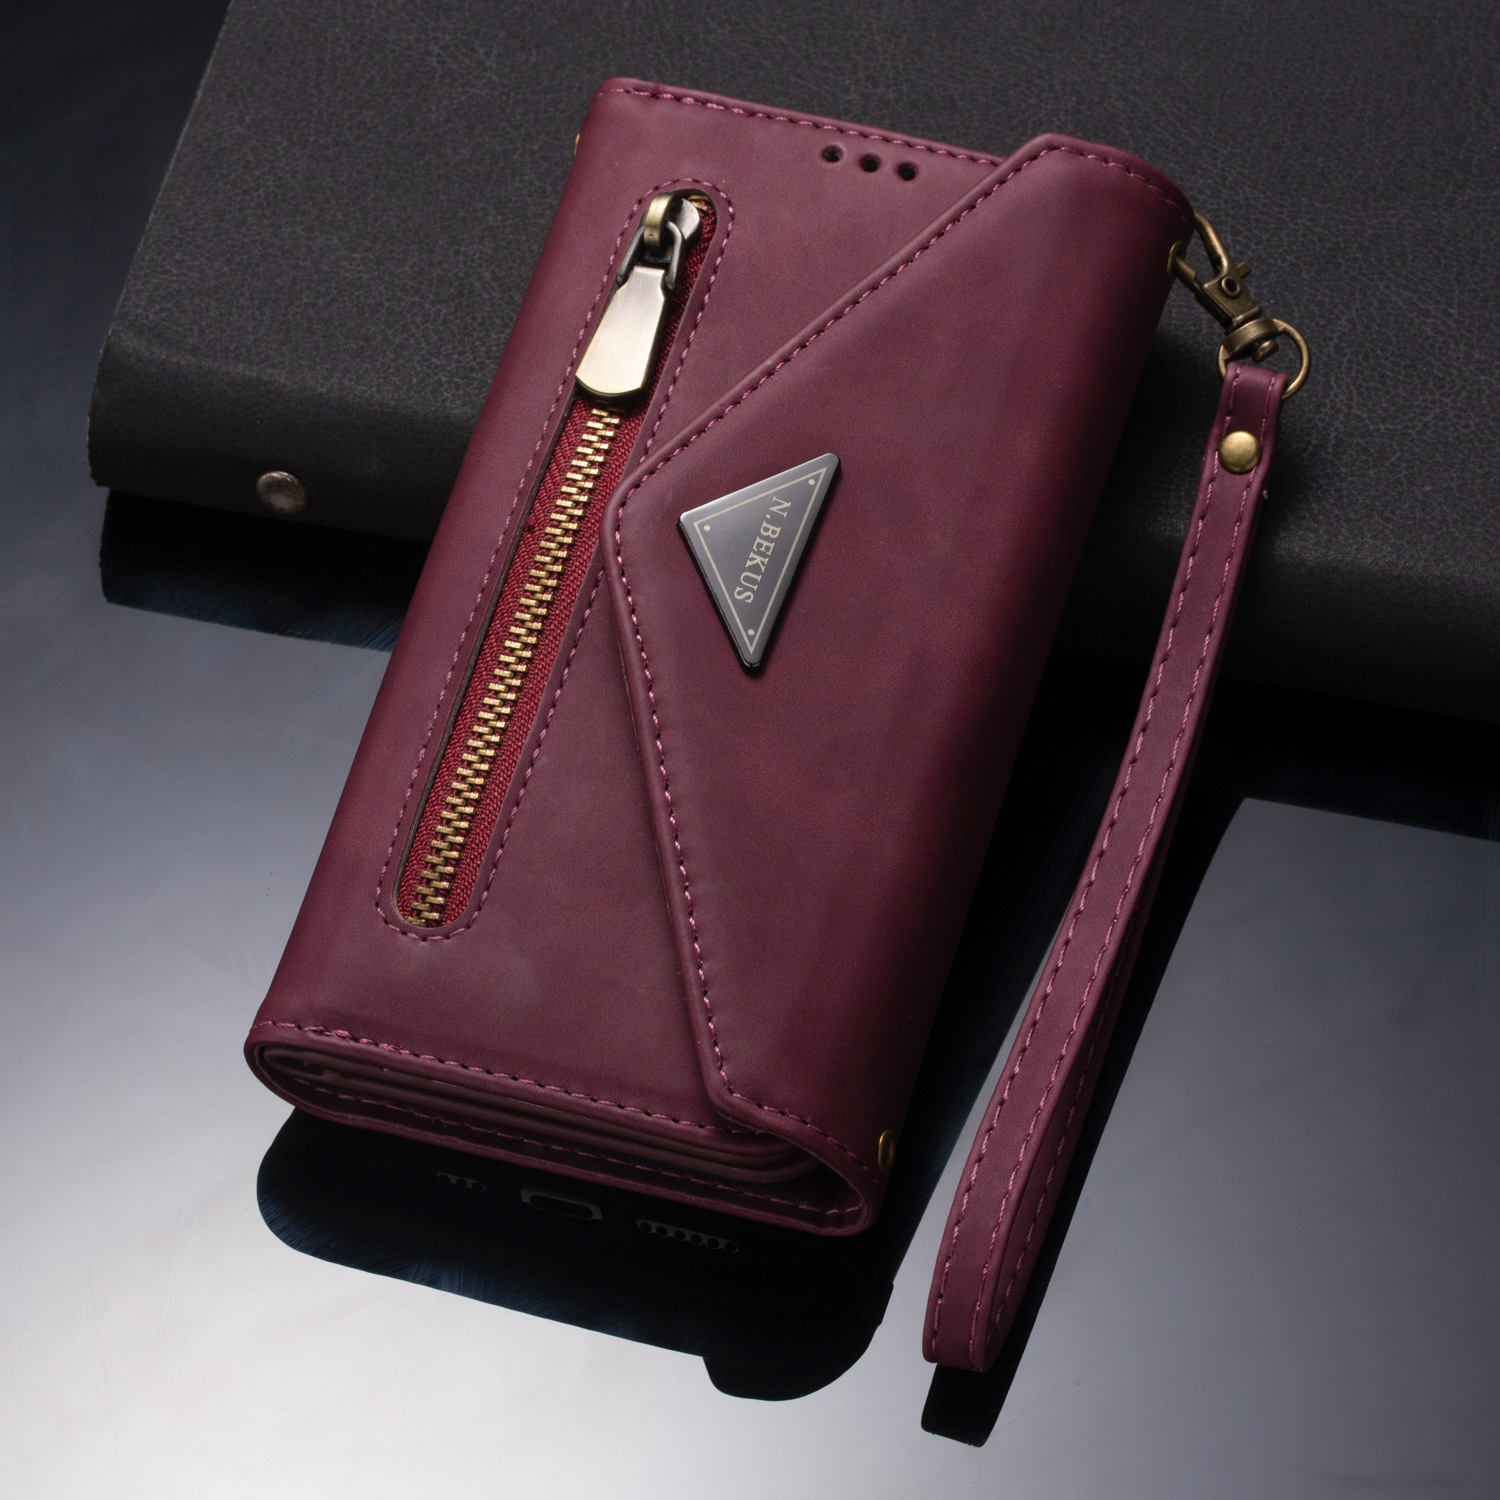 Multifunctional-Flip-with-Multi-Card-Slot-Phone-Wallet-Full-Body-Protective-Case-Handbag-for-iPhone--1842560-10